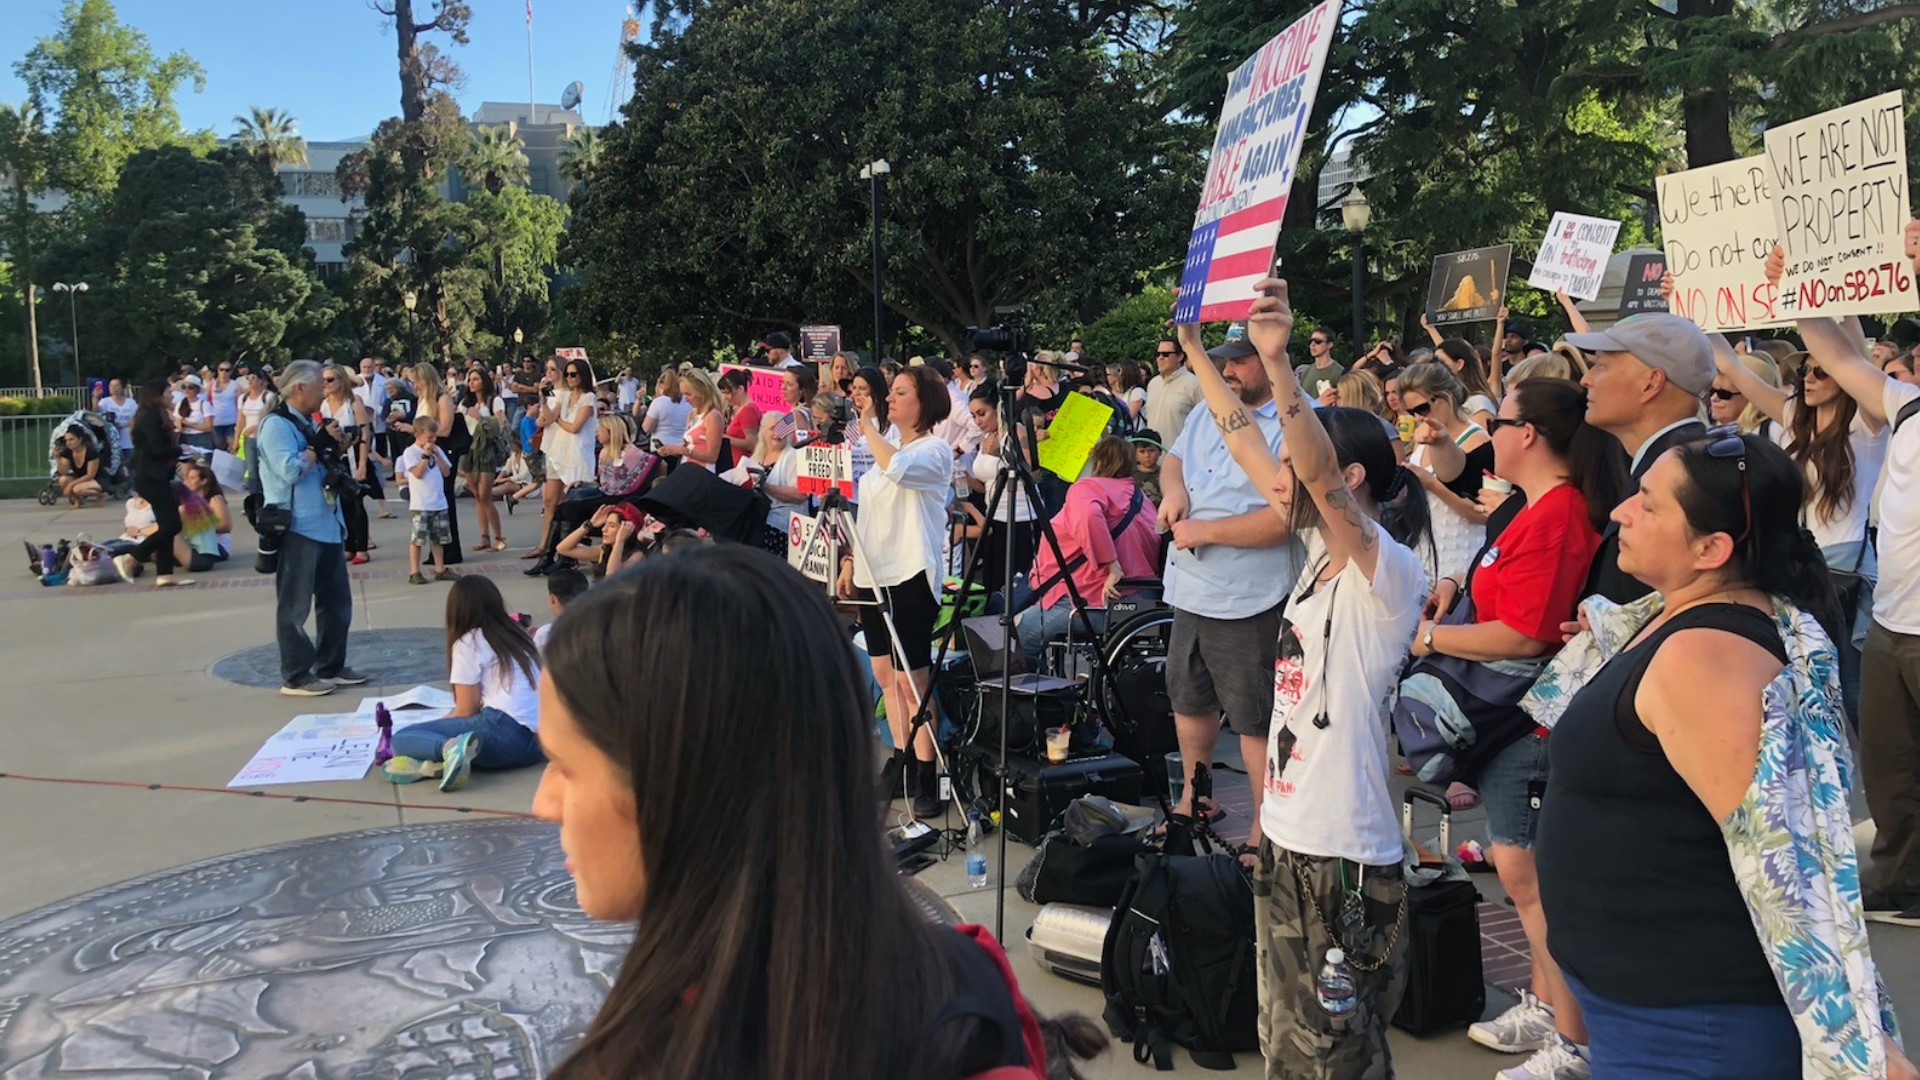 Hundreds of anti-vaccine families rallied at the Capitol against Senate Bill 276. This proposed law would create a statewide standardized medical exemption request form which would then require a state public health official to approve or deny medical exemption request for vaccines.